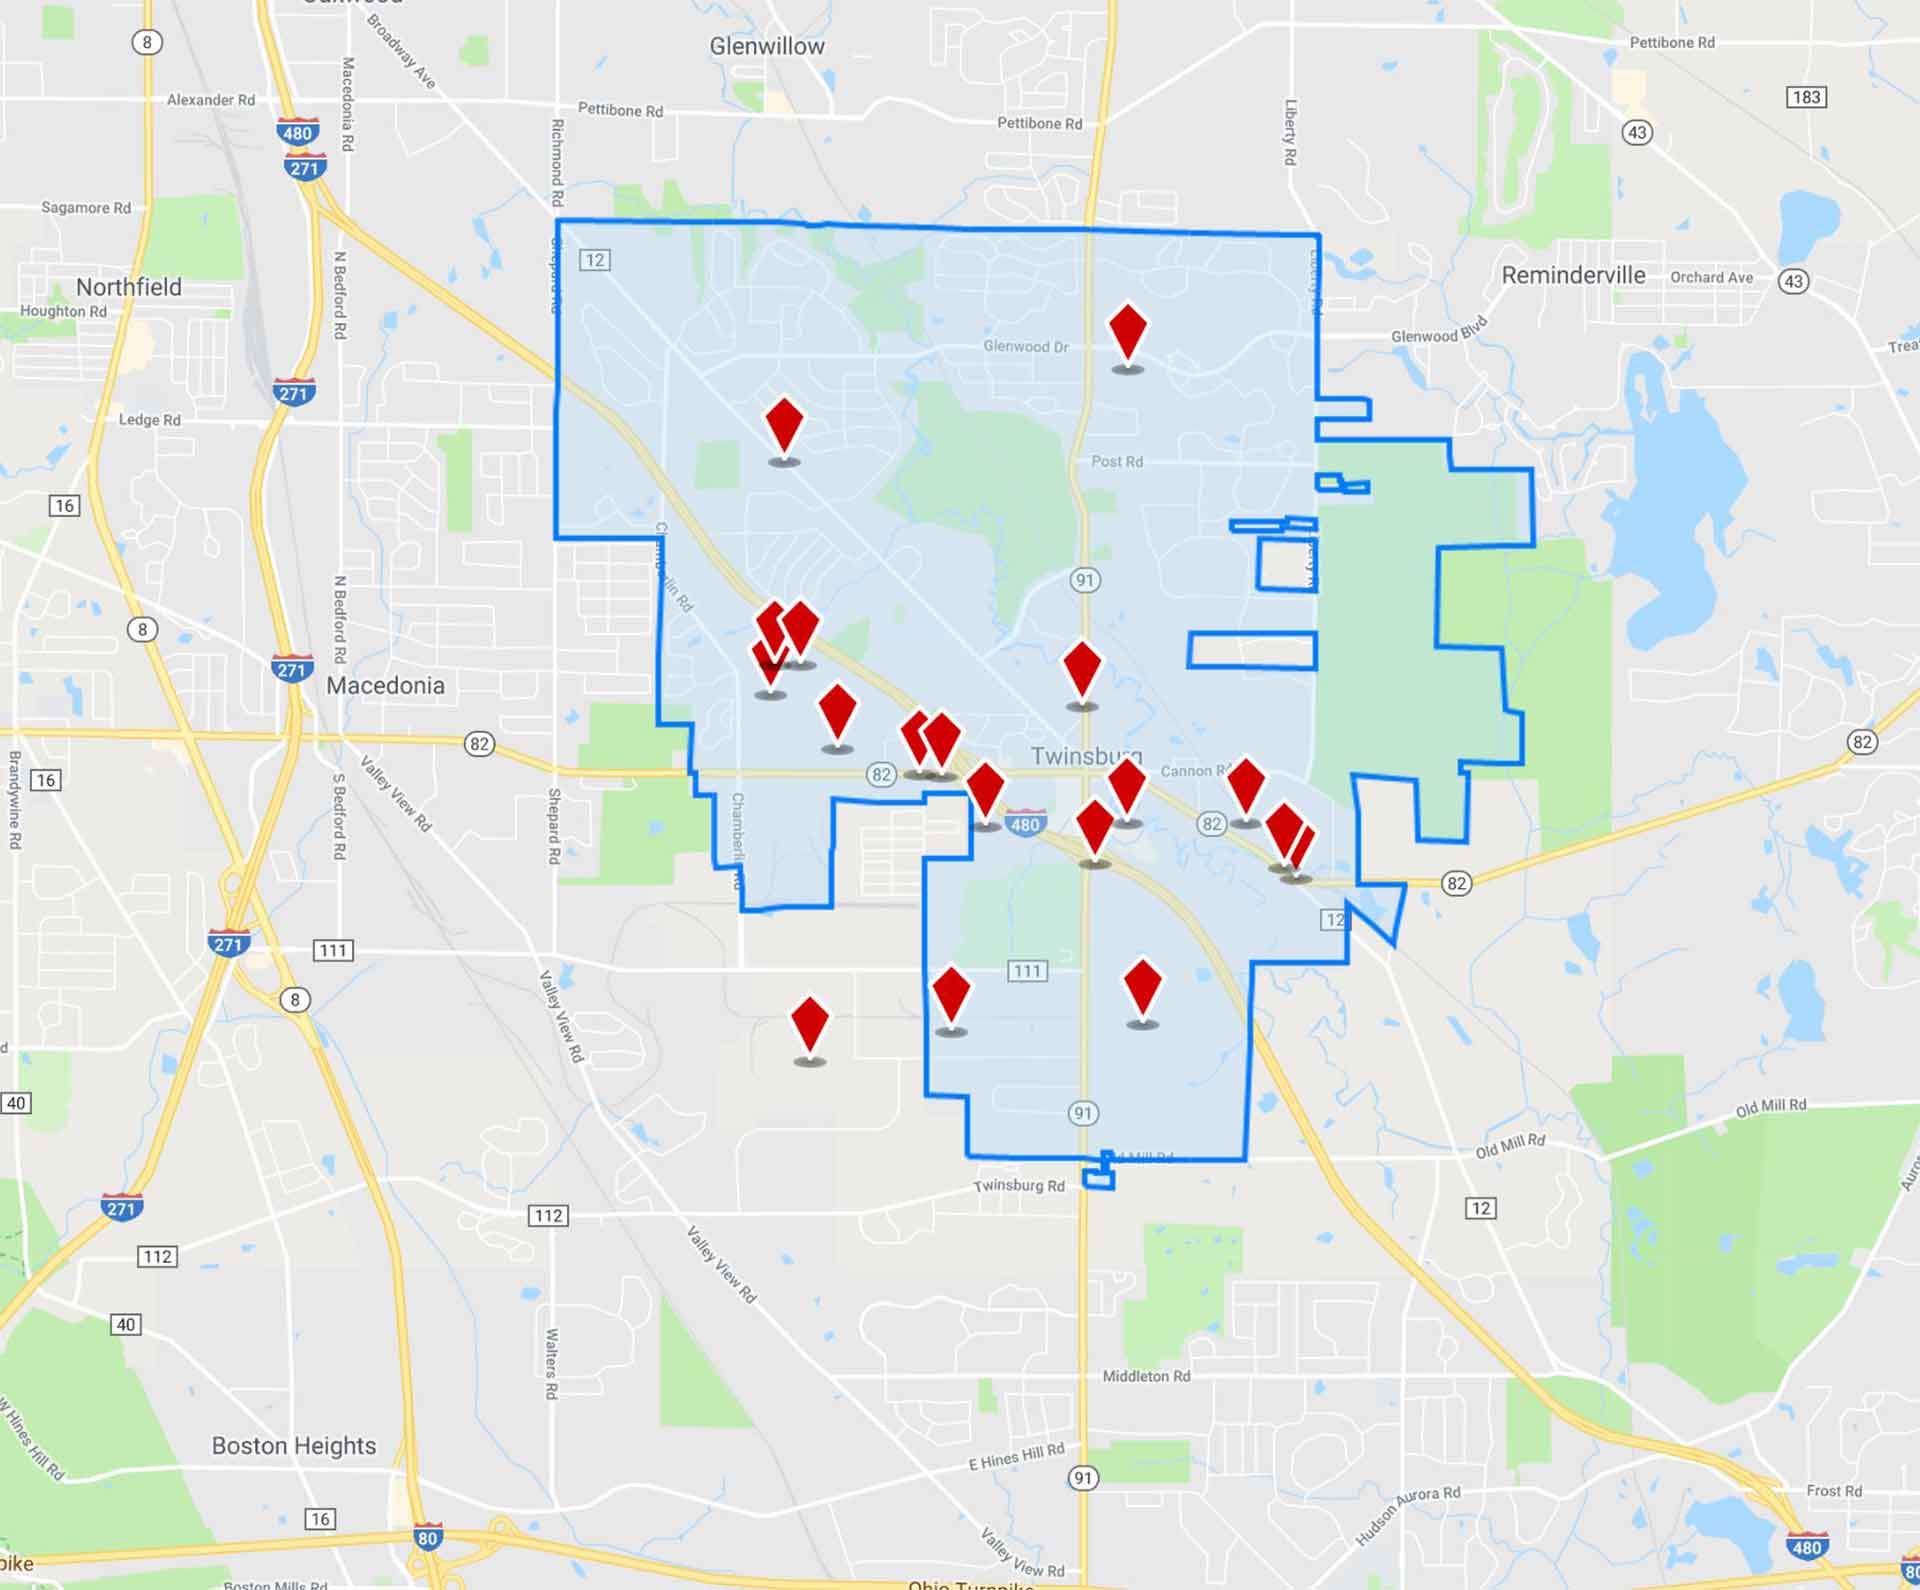 The City of Twinsburg uses Loopnet, an online tool designed to help businesses find commercial properties located in Twinsburg that are available for sale or lease. Loopnet allows businesses to search a database of properties located in Twinsburg by search criteria including property type, lease rate, sale price, square footage, acreage, keywords, and more